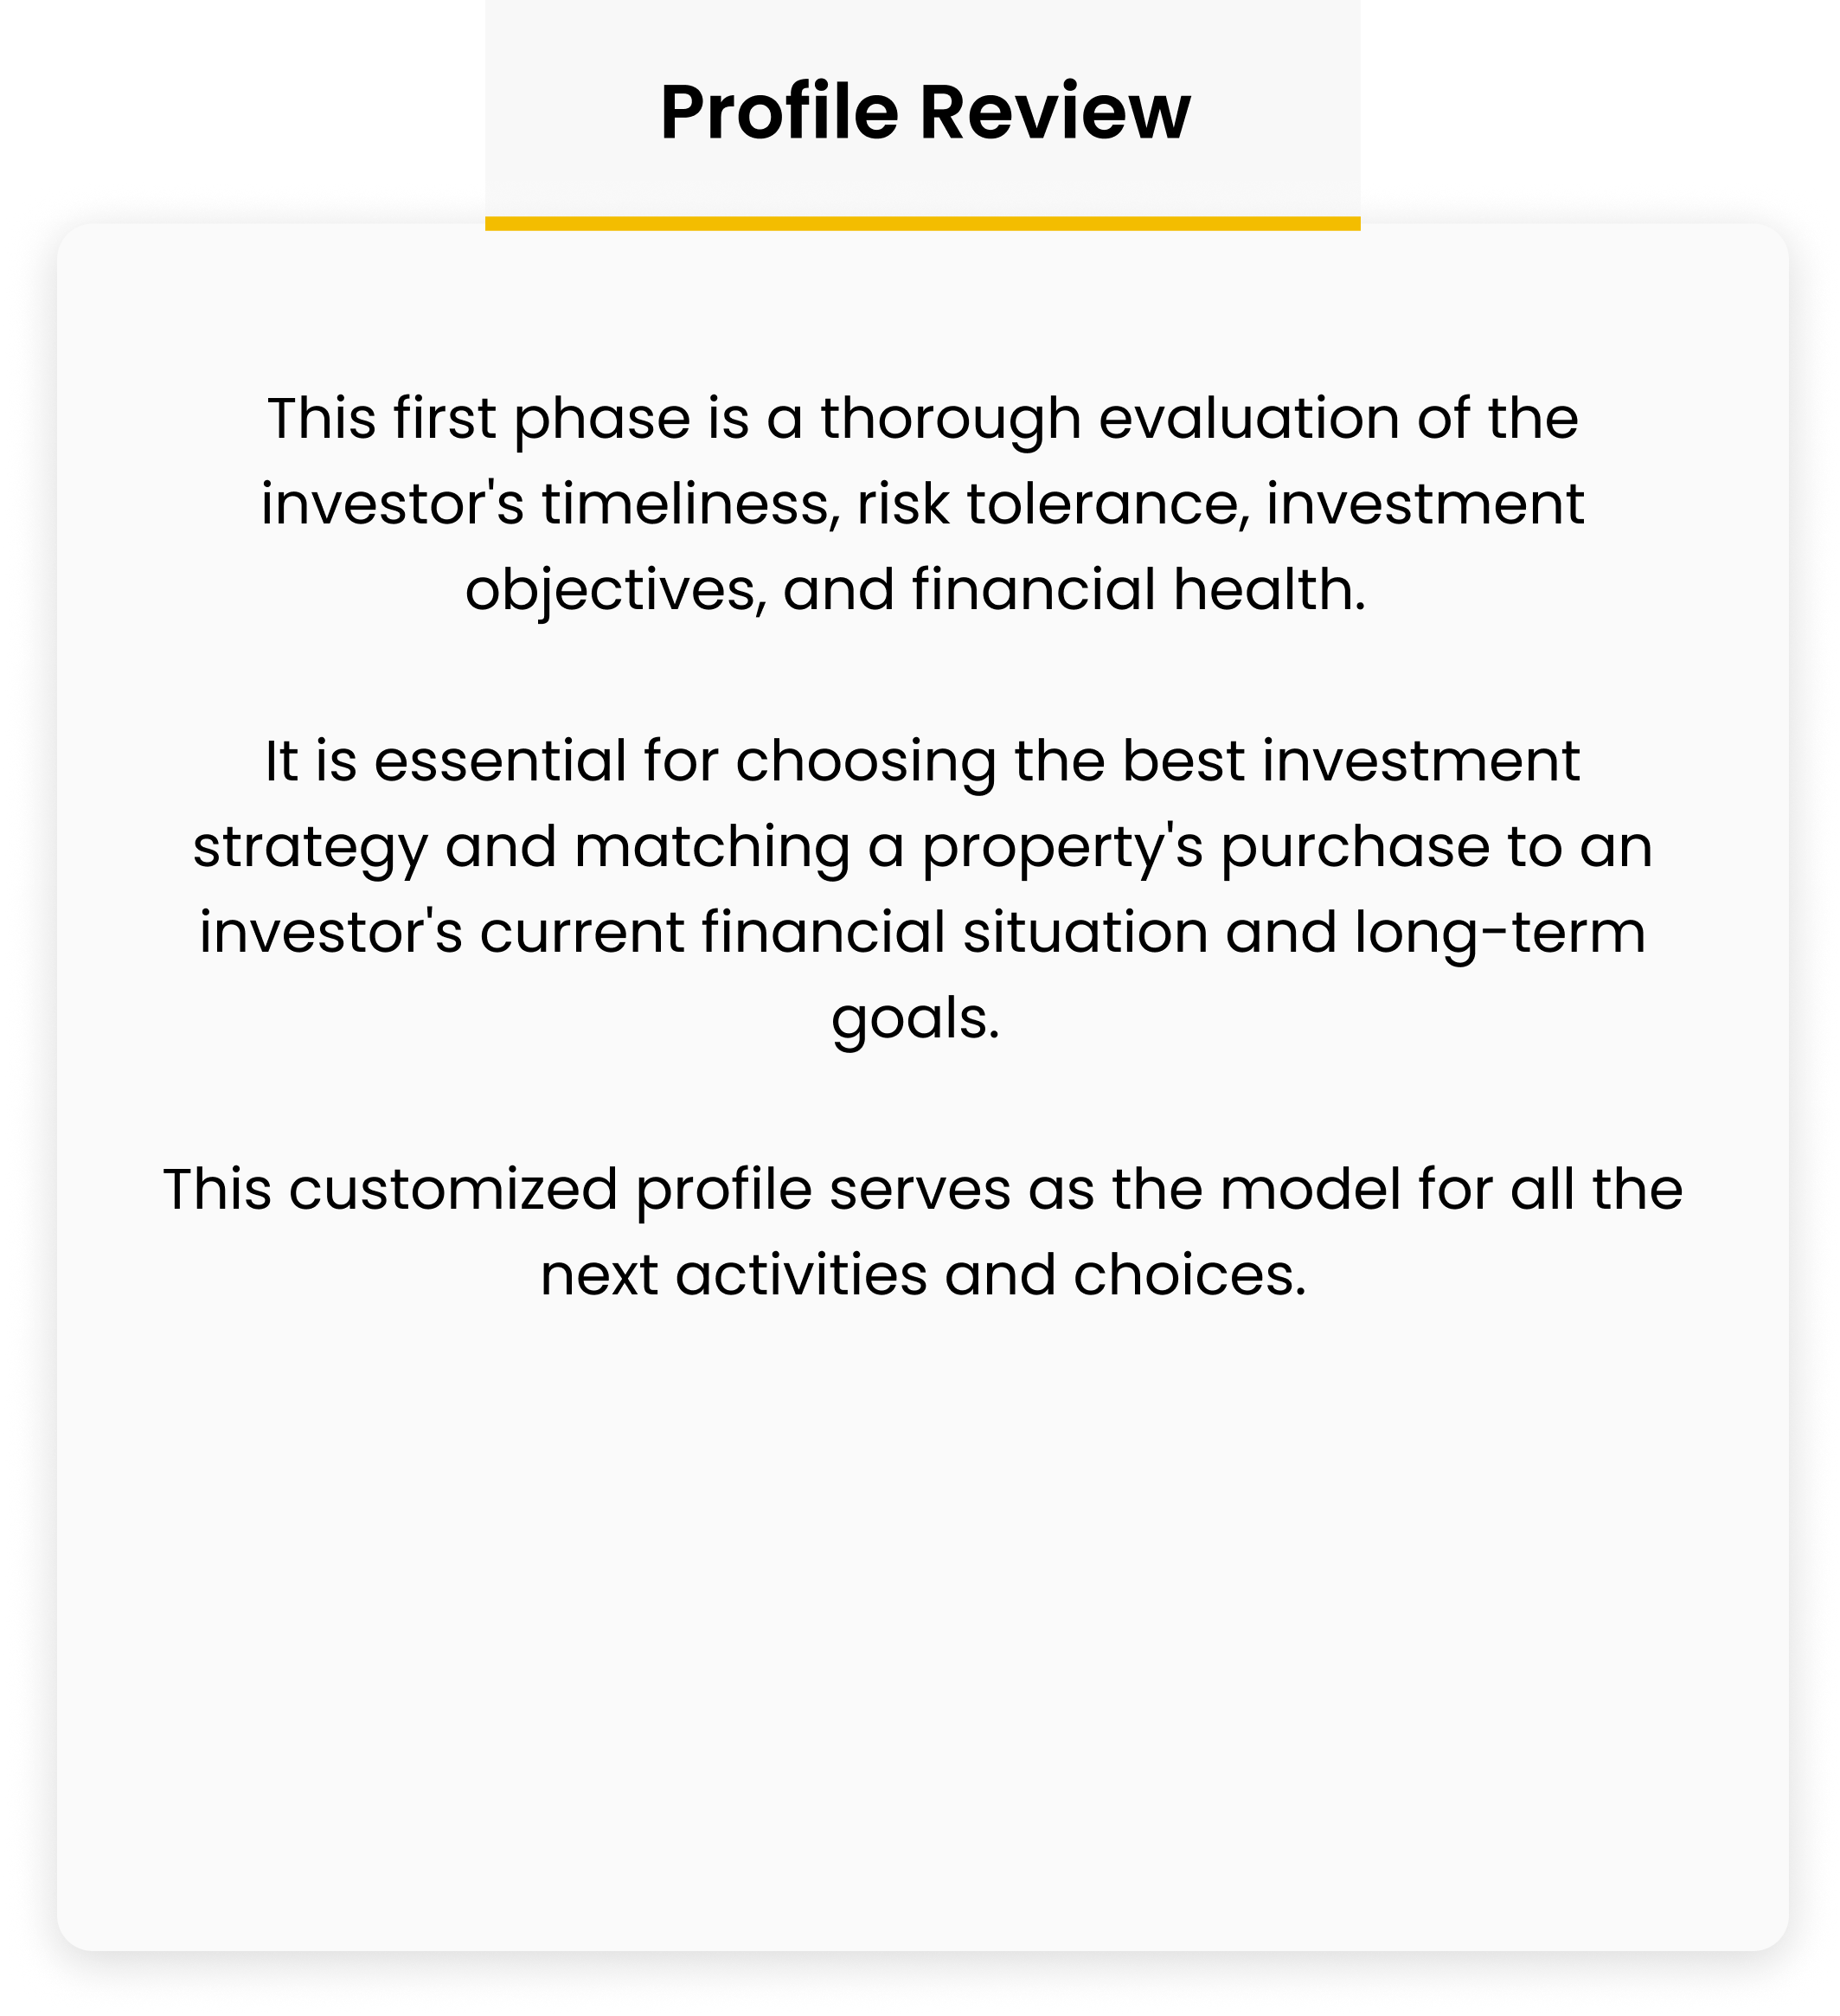 Profile Review